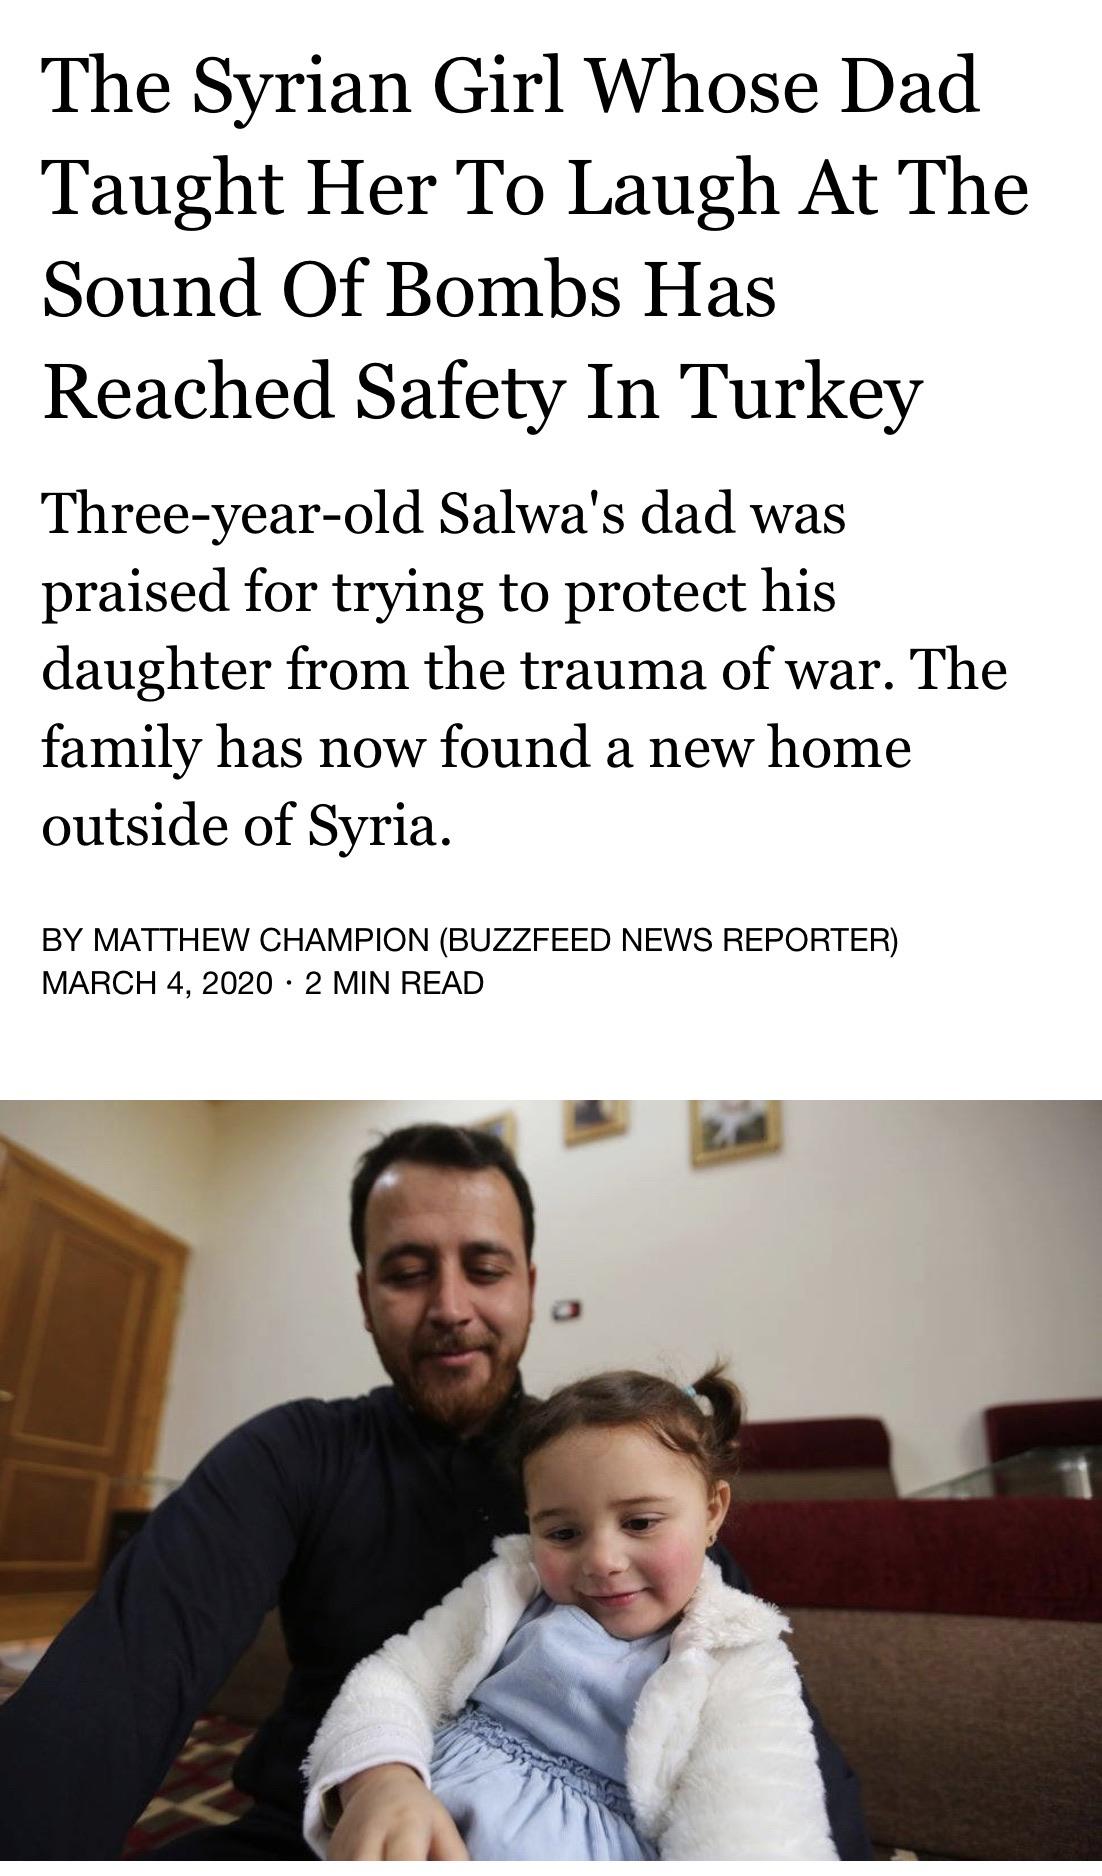 Syria - The Syrian Girl Whose Dad Taught Her To Laugh At The Sound Of Bombs Has Reached Safety In Turkey Threeyearold Salwa's dad was praised for trying to protect his daughter from the trauma of war. The family has now found a new home outside of Syria. 